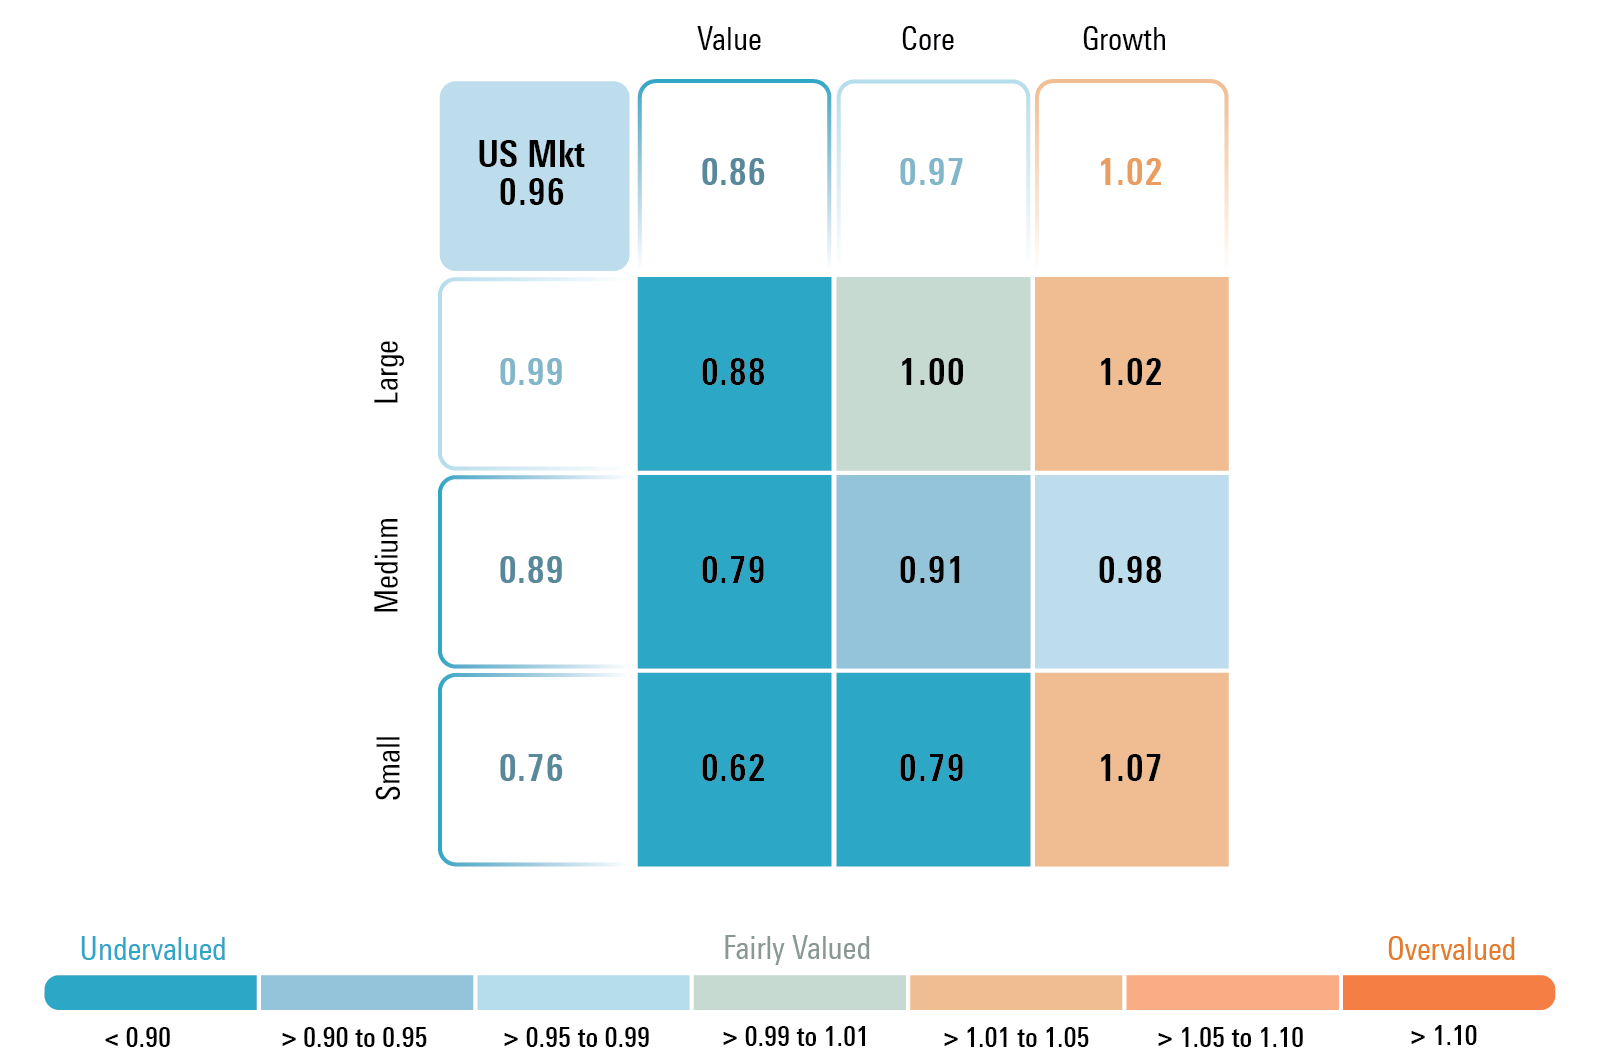 Graphic that displays the price to fair value metric for each category of the Morningstar style box.